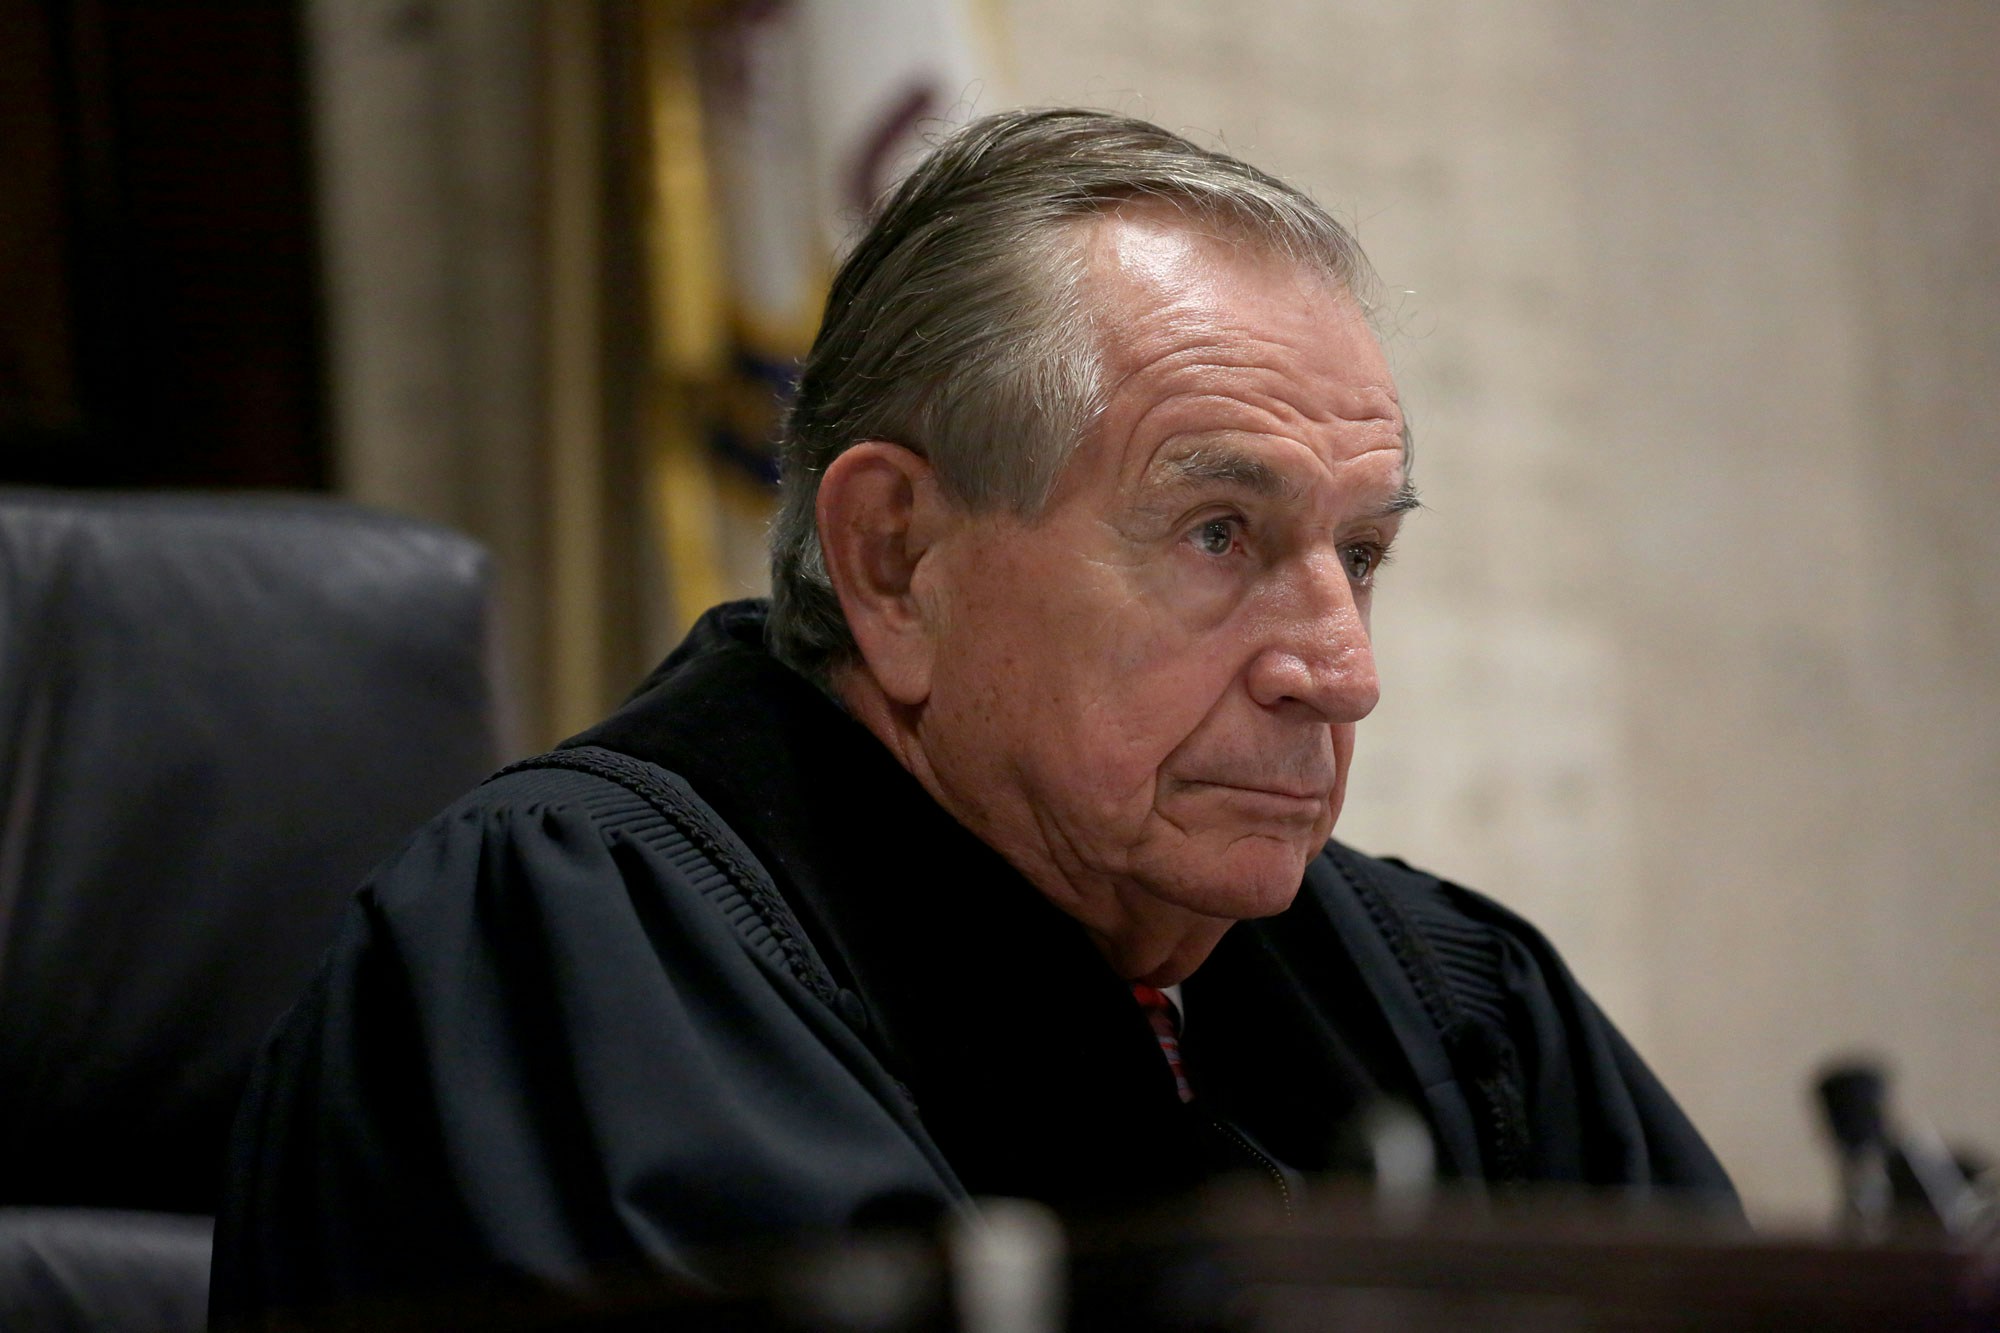 Judge Vincent Gaughan presides over the Jason Van Dyke hearing at the Leighton Criminal Courts Building in Chicago on Thursday, Aug. 4, 2016. Kane County State's Attorney Joseph McMahon was sworn in as the independent attorney to prosecute Chicago police Officer Jason Van Dyke. (Nancy Stone/Chicago Tribune, Pool)